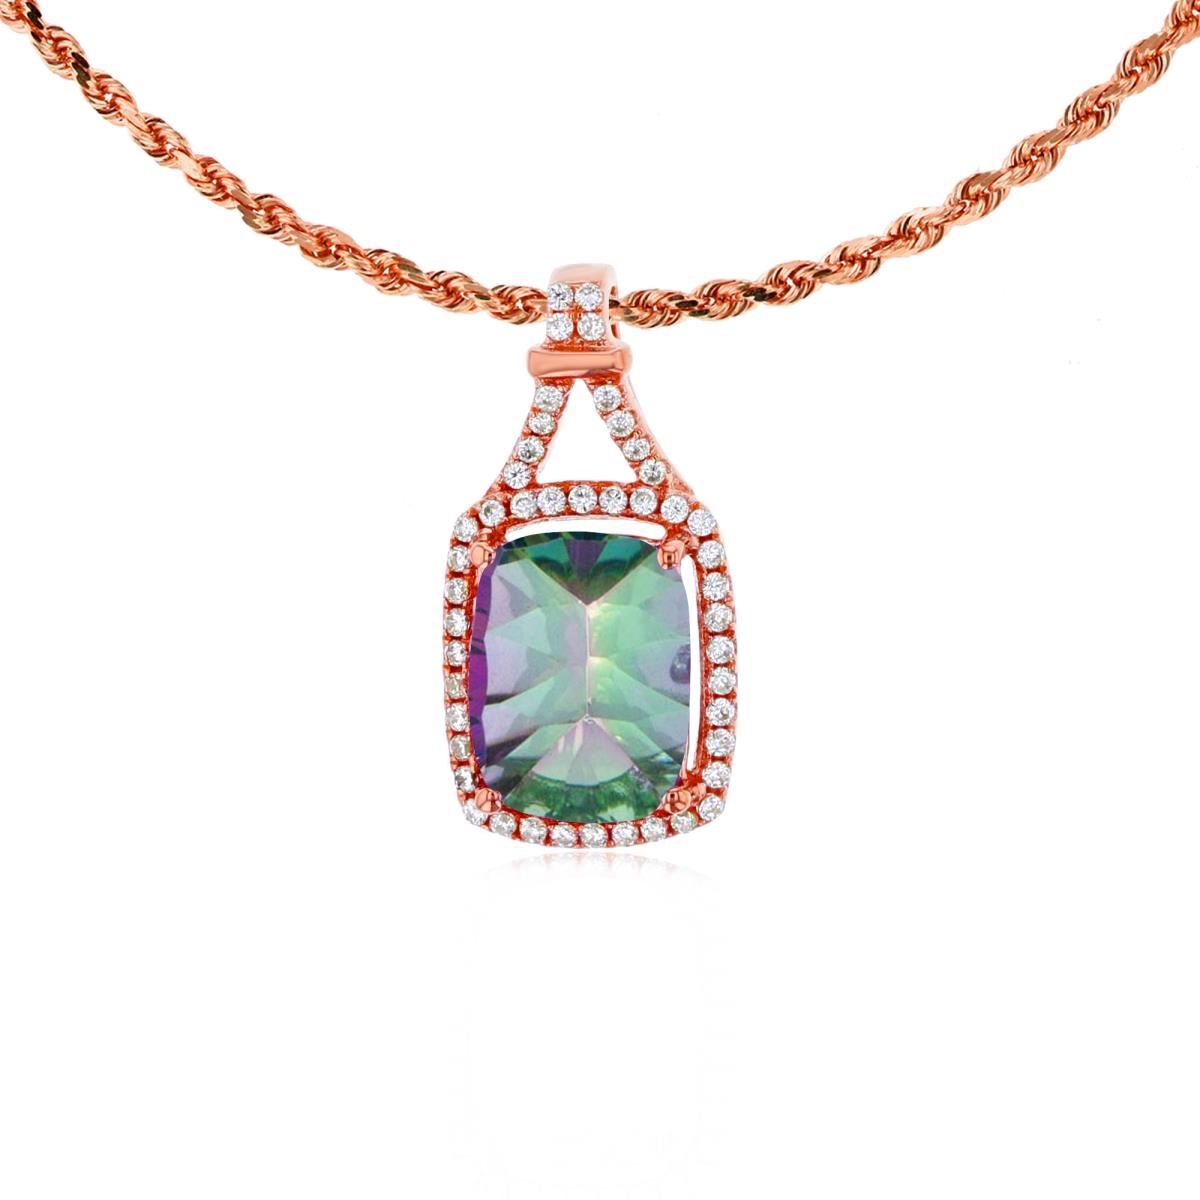 10K Rose Gold 8x6mm Cushion Mystic Green Topaz & 0.13 CTTW Rd Diamonds Halo 18" Rope Chain Necklace